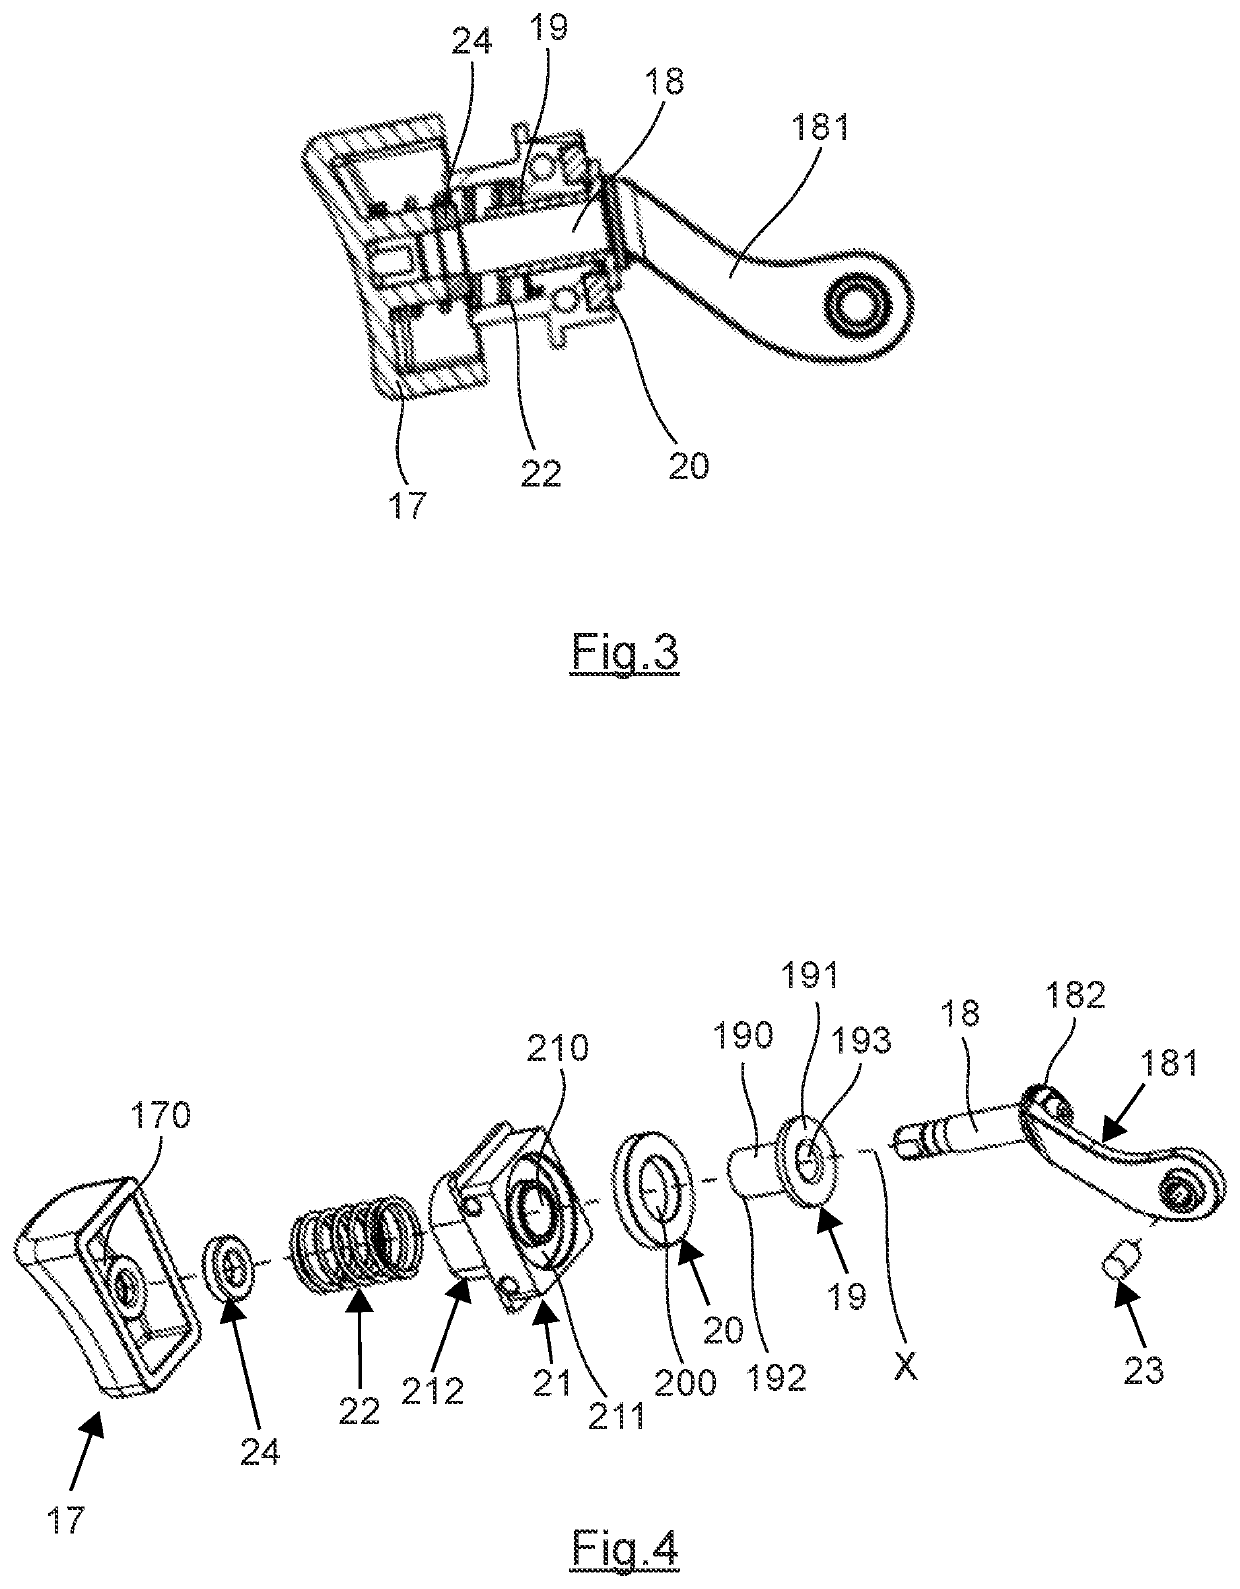 Drilling device with optimized actuation